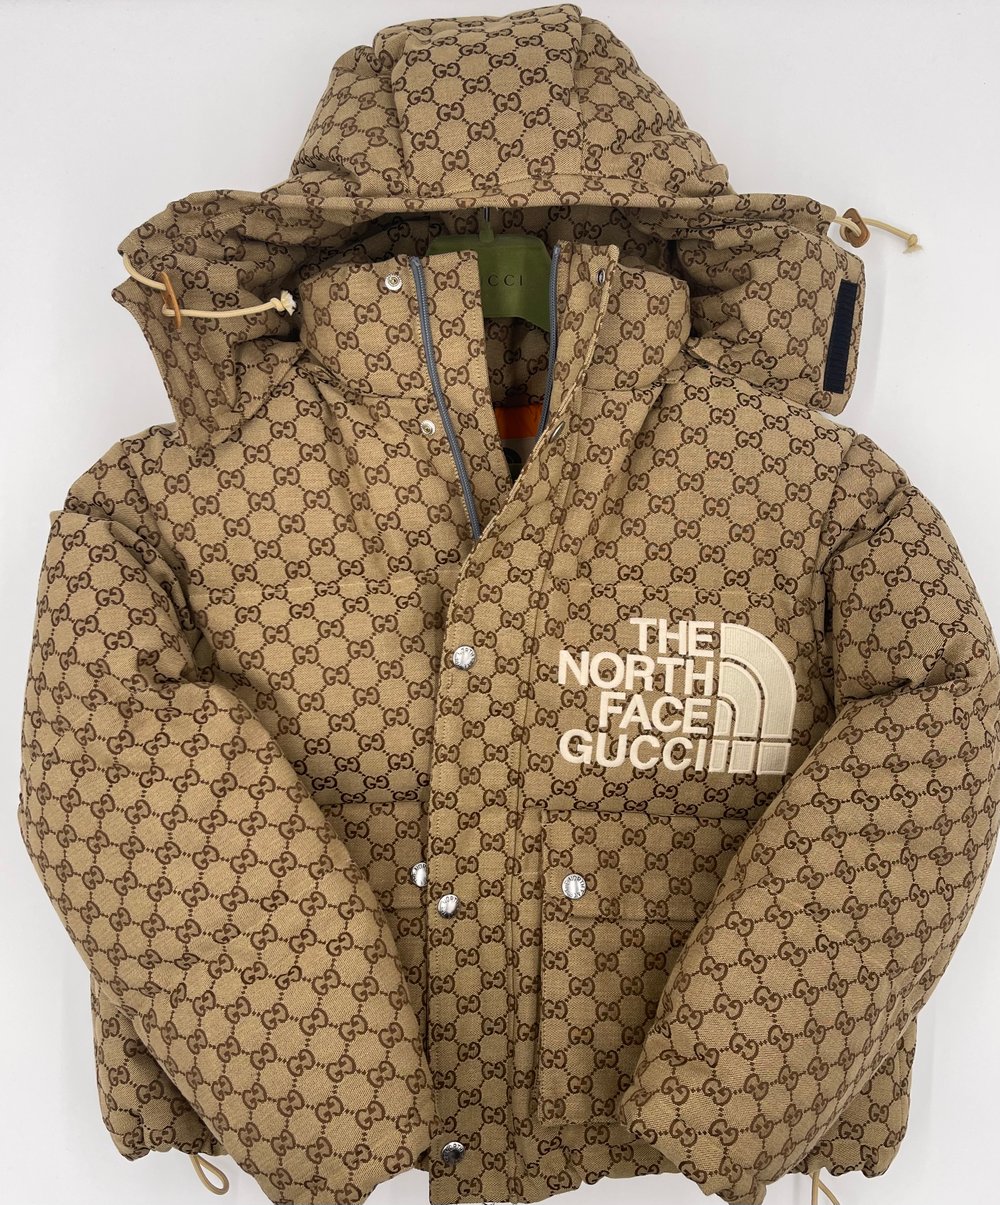 Gucci x The North Face GG Puffer Jacket | ADKILLAINK